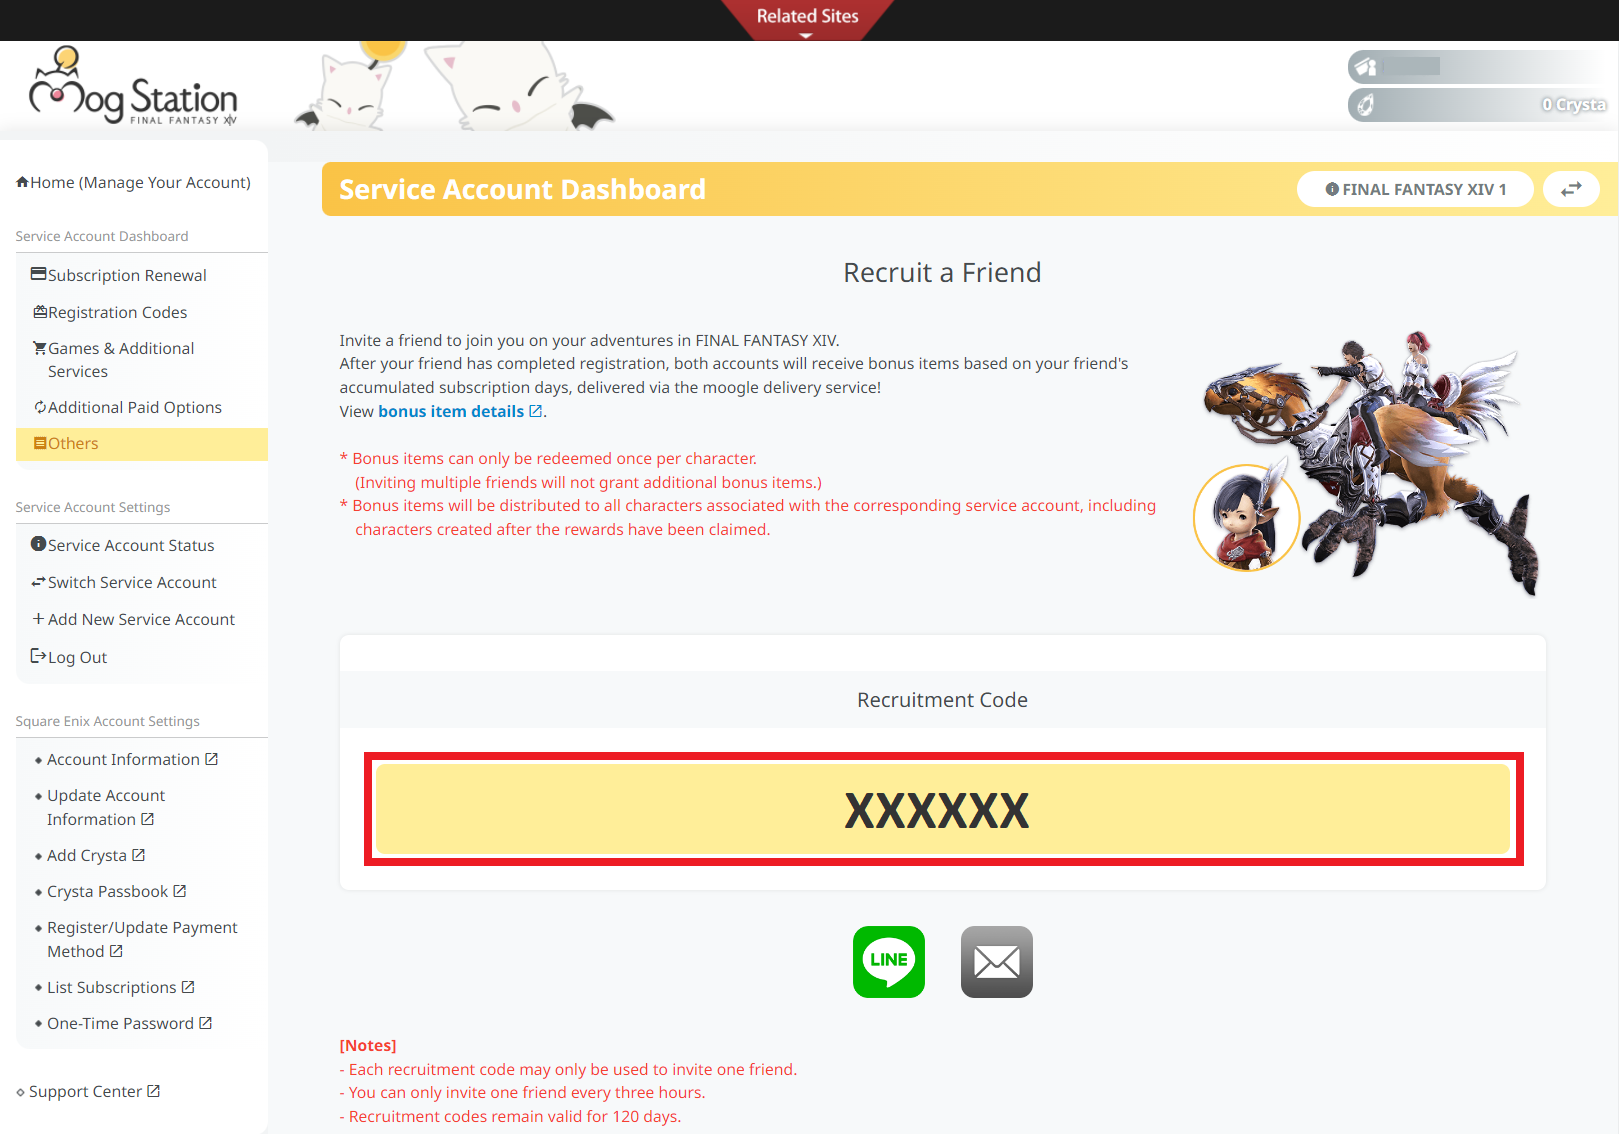 Square Enix asks for your ID as a required field to recover your